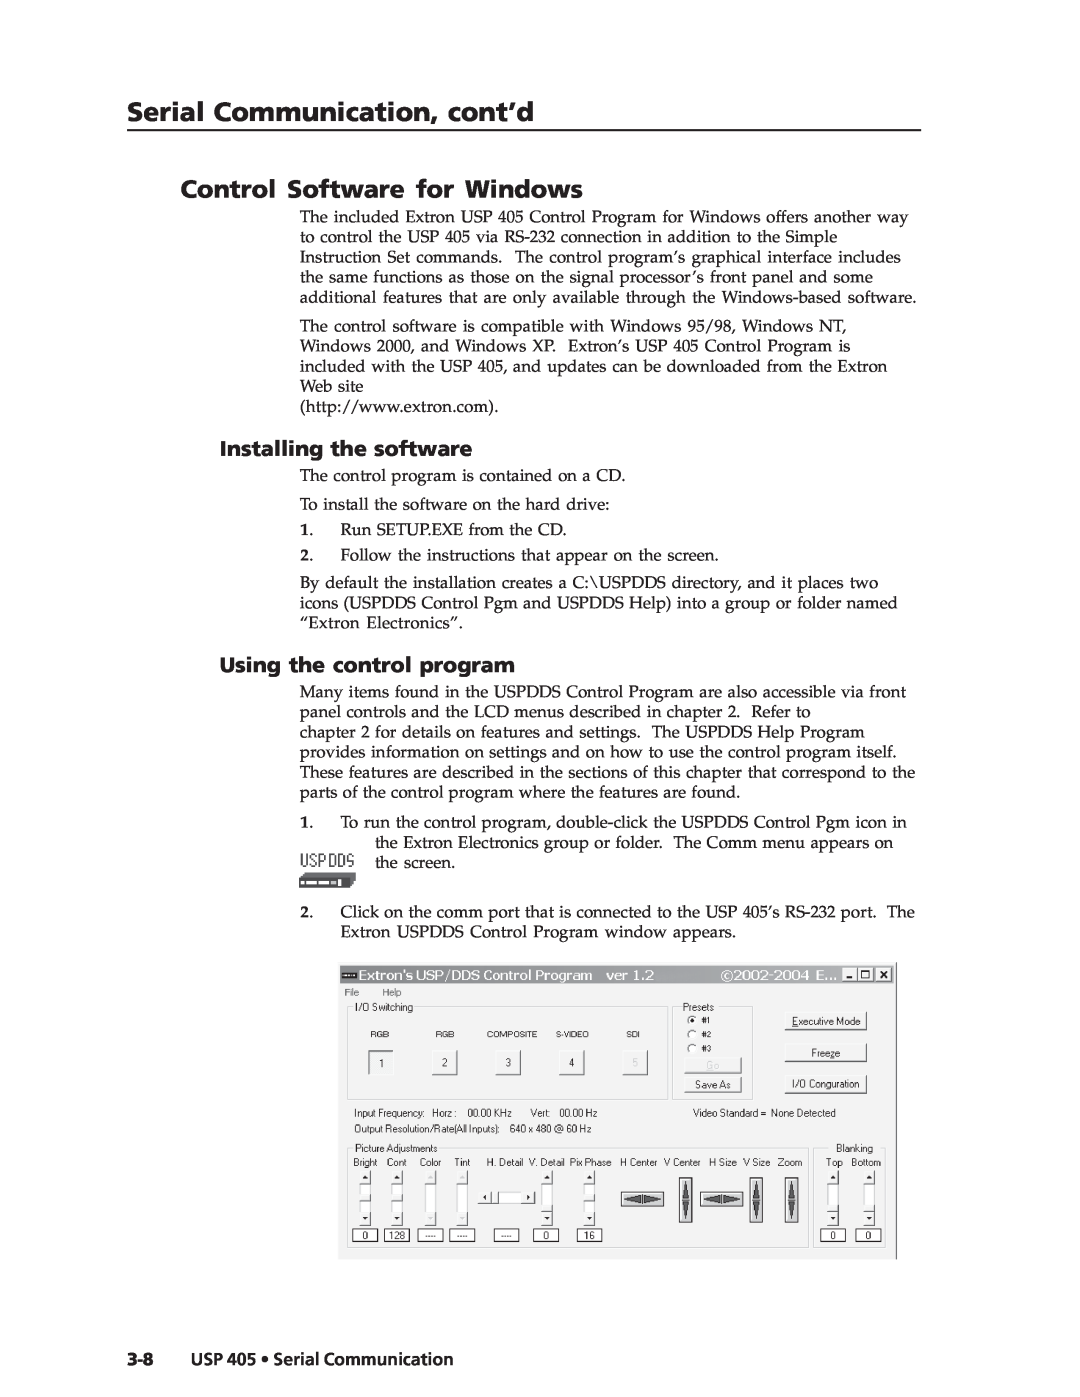 Extron electronic USP 405 manual Control Software for Windows, Installing the software, Using the control program 